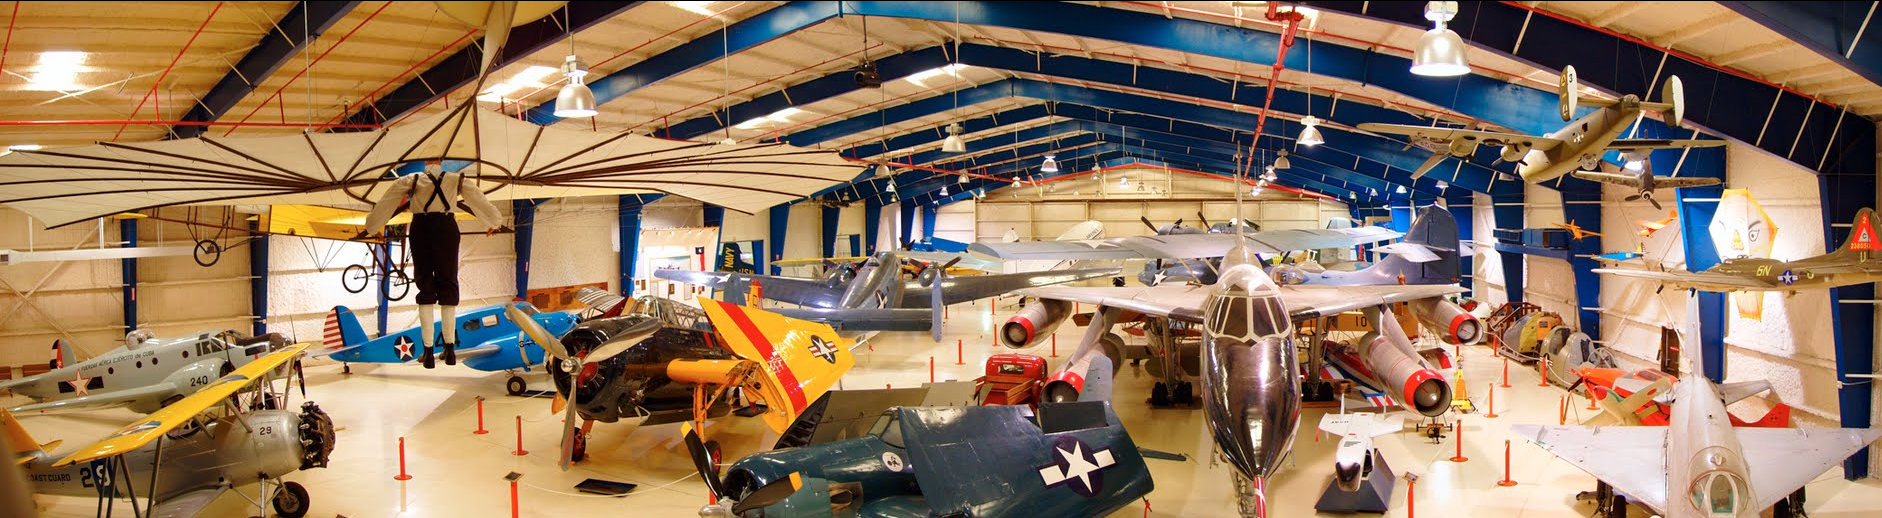 The Lone Star Flight Museum, a 501 (c)(3) self-supporting educational museum, began as a private aircraft collection in June 1985.